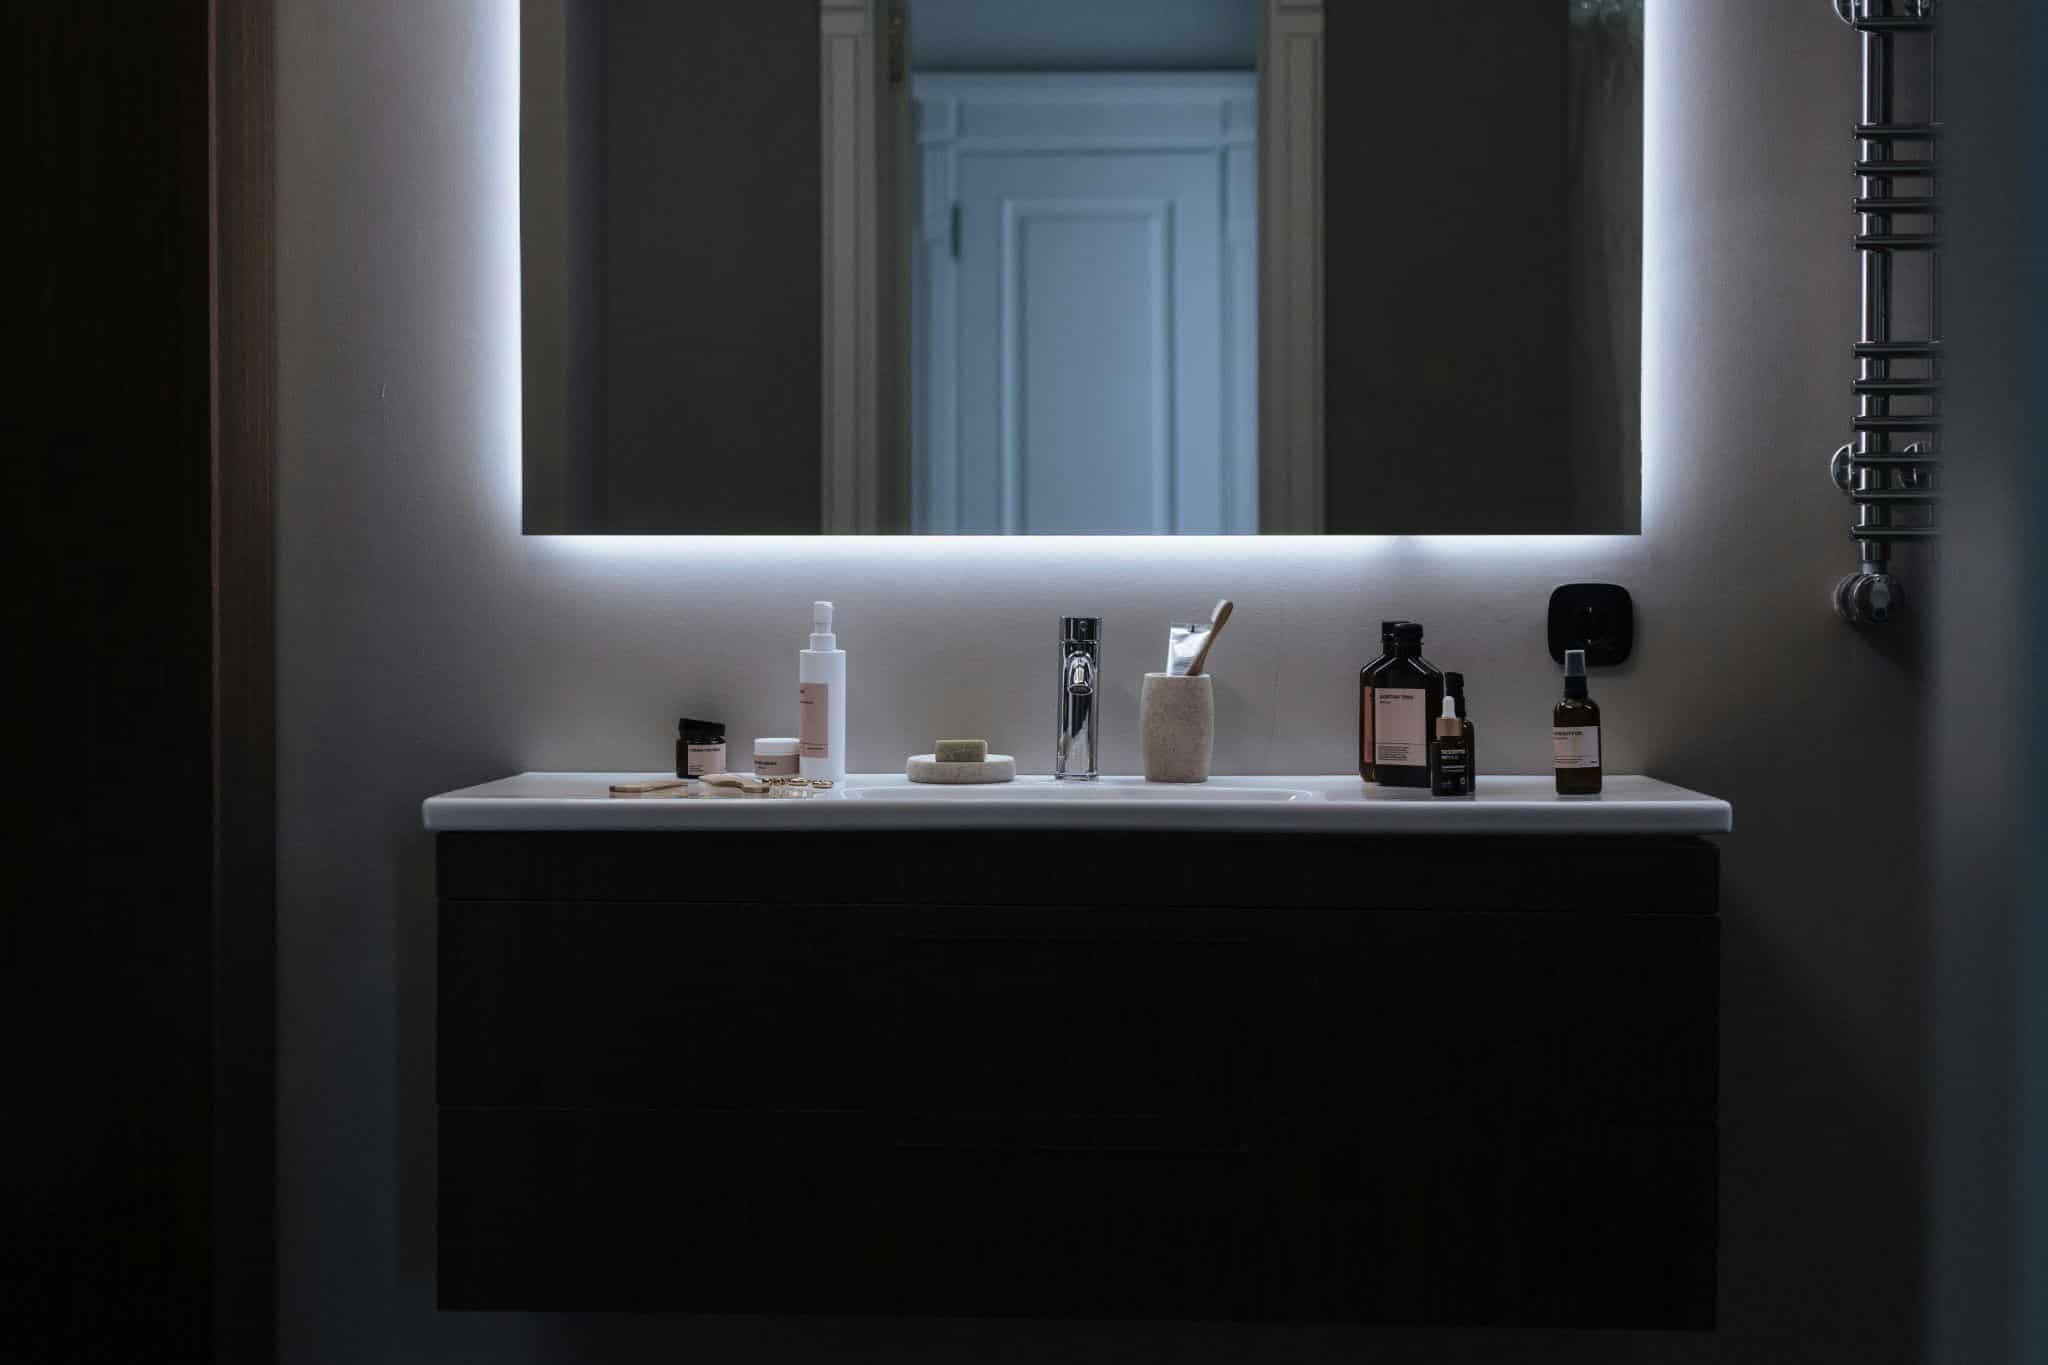 Spa at Home: 6 Innovative Tech Features for Your Bathroom